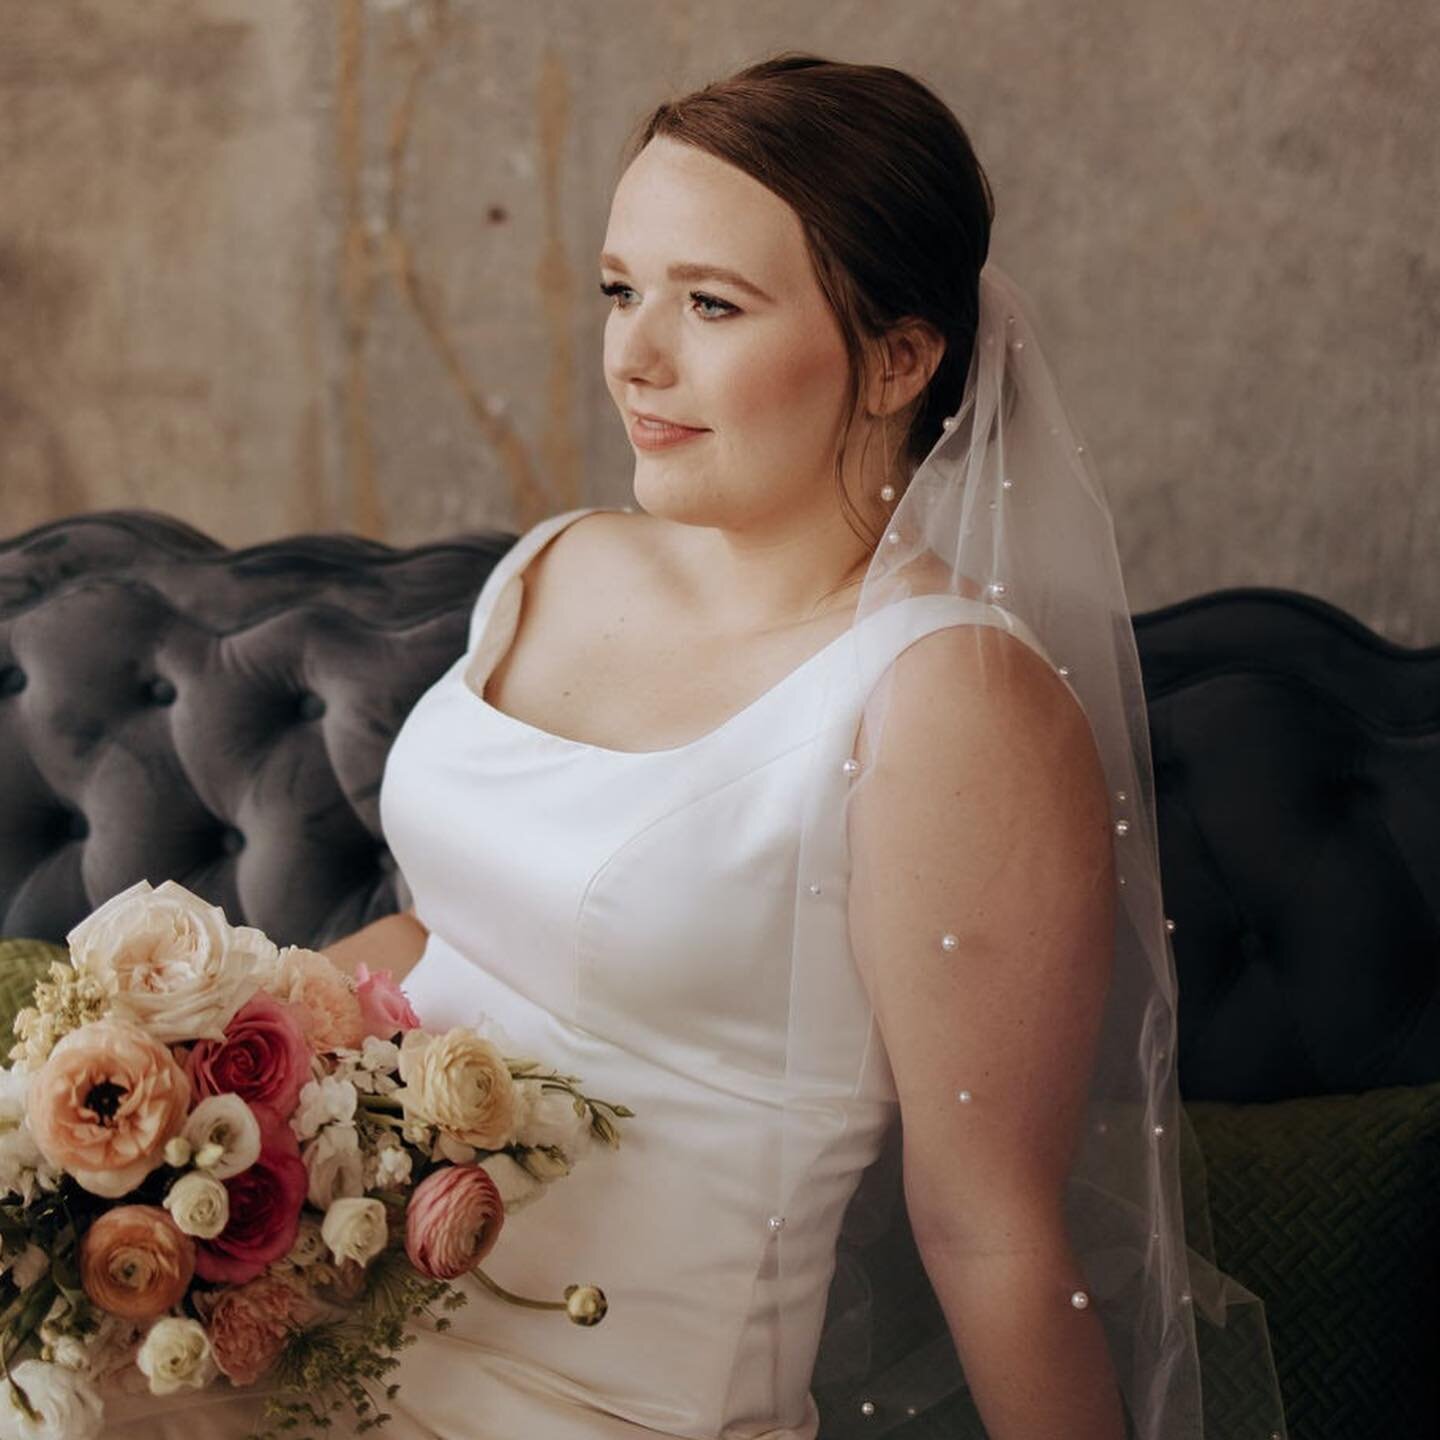 Forever obsessed with bridal makeup that is defining &amp; fresh. Rachel&rsquo;s bridal makeup was focused on evening out her fair skin while still maintaining a light-as-air feel. Most of my brides don&rsquo;t wear much makeup daily, so proper skin 